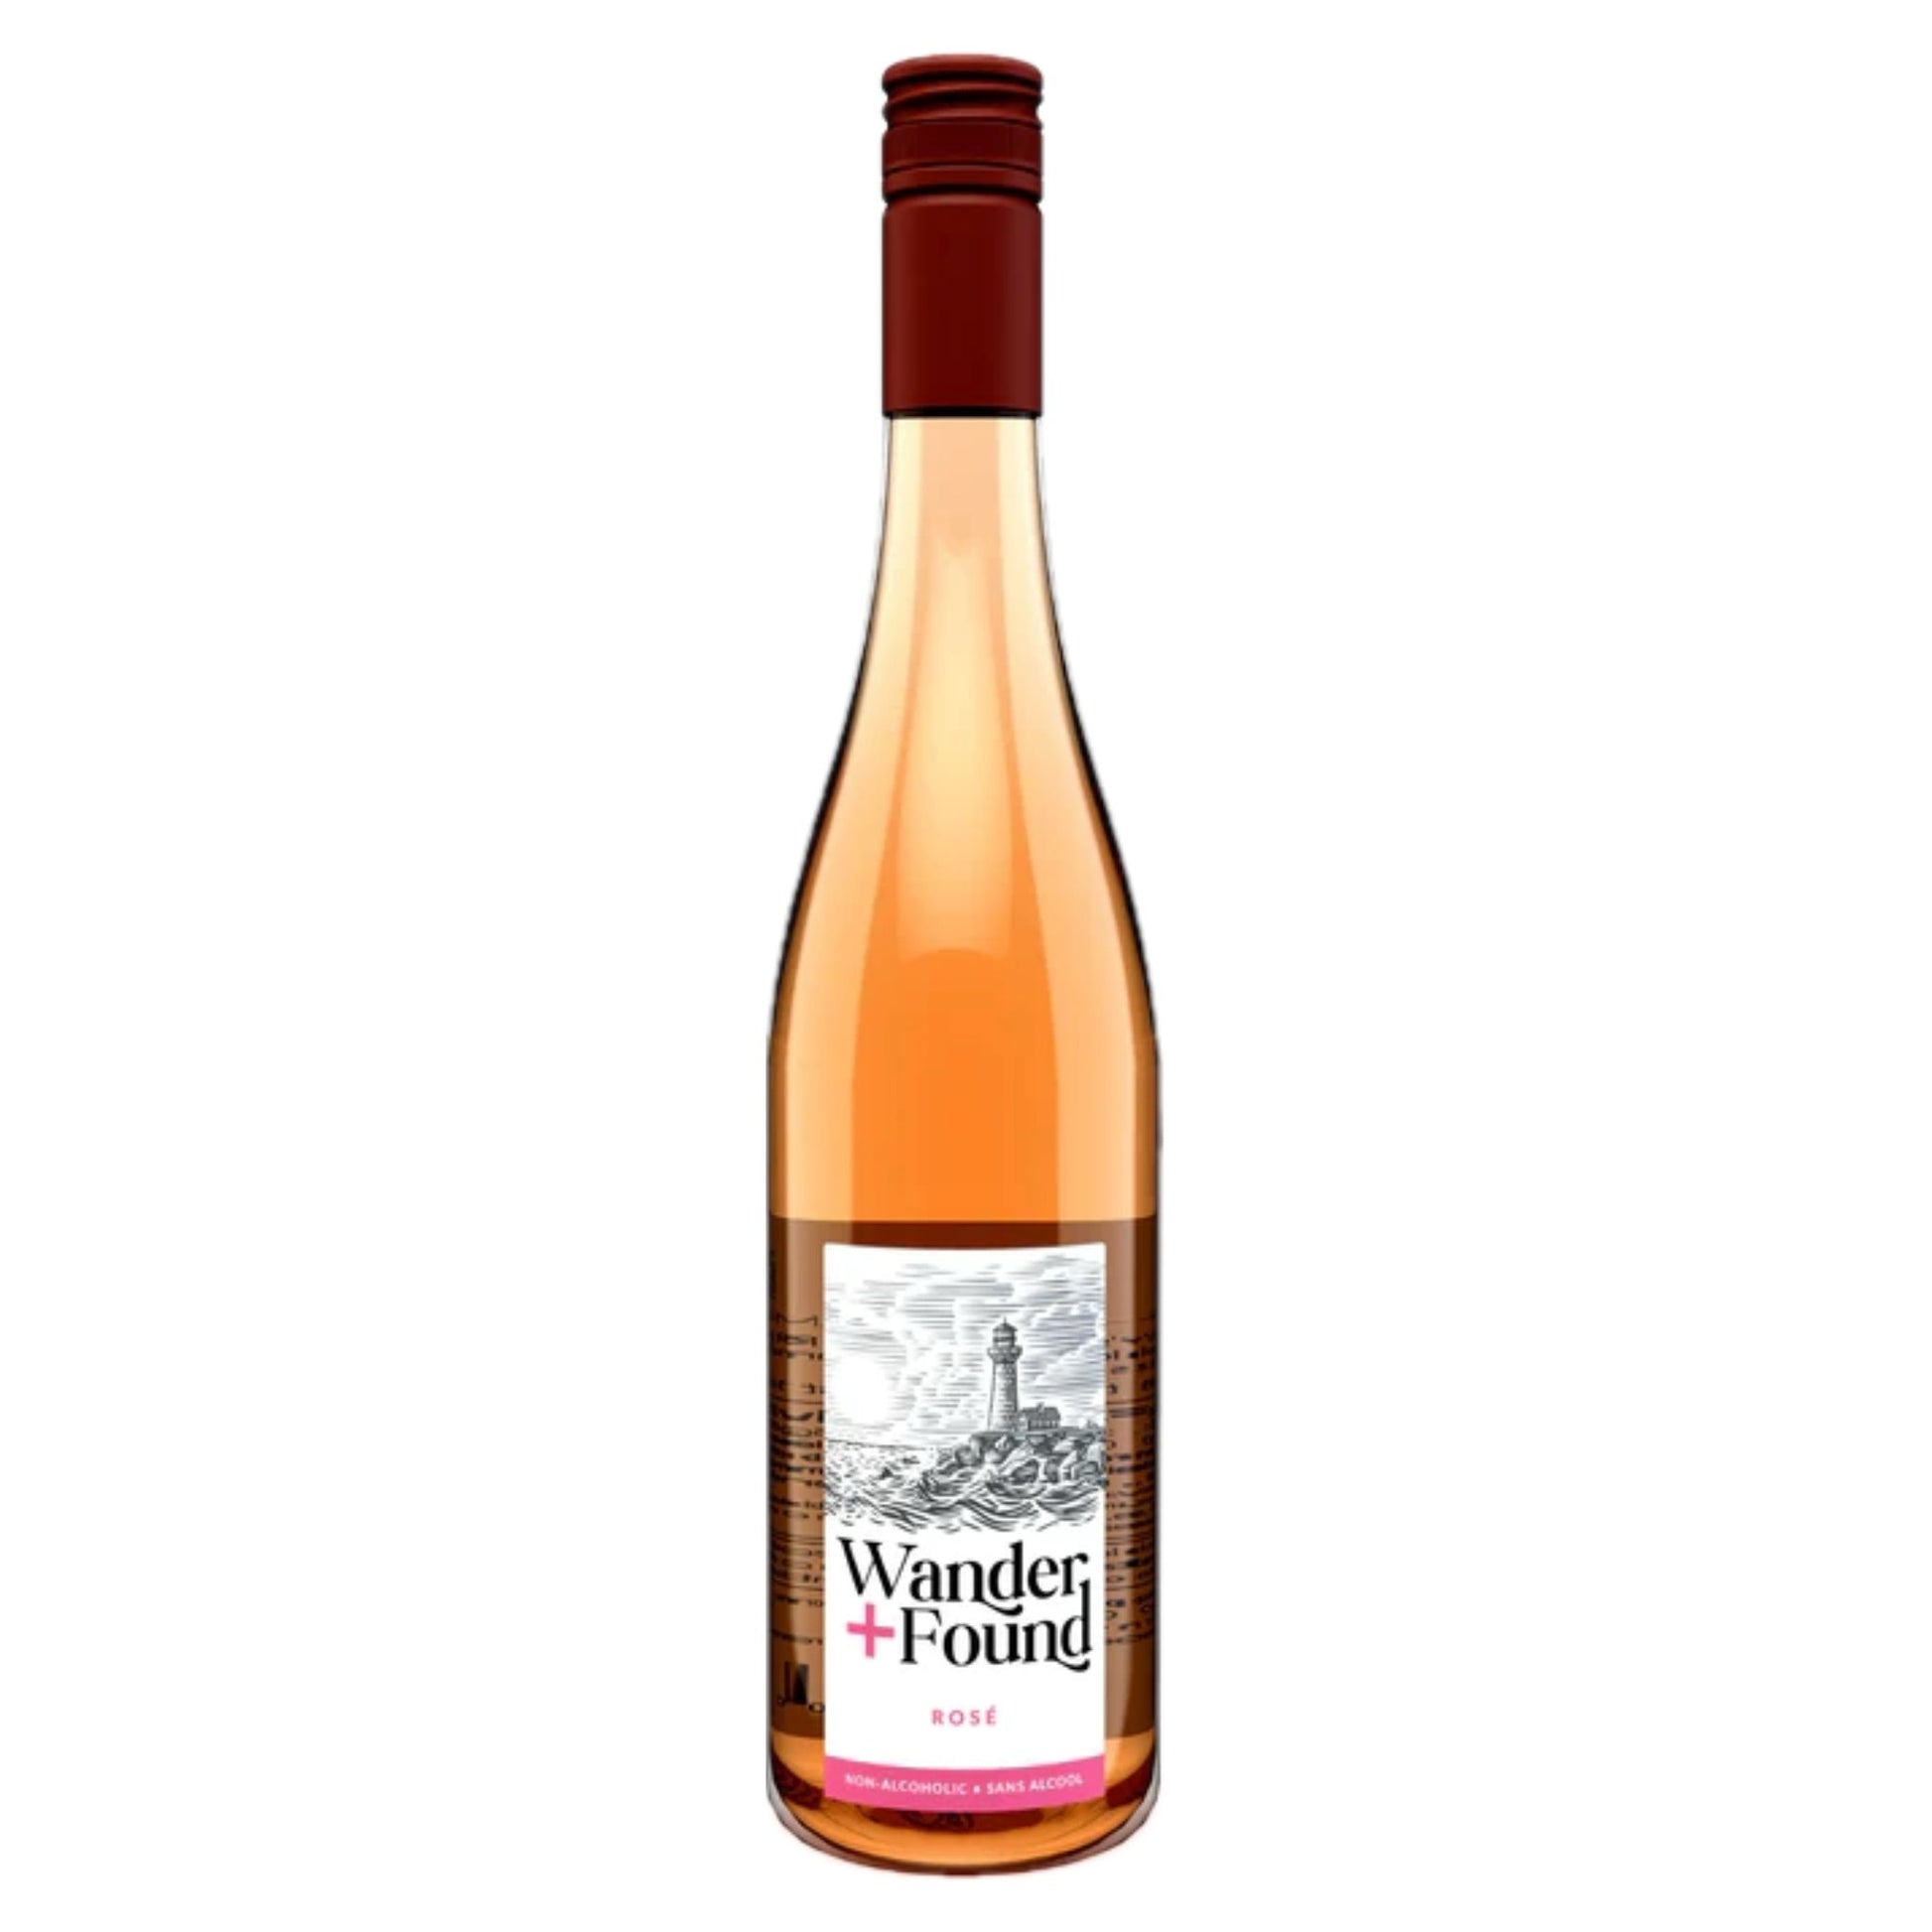 Wander and Found Non-Alcoholic Rosé is available at Knyota Non-Alcoholic Drinks.